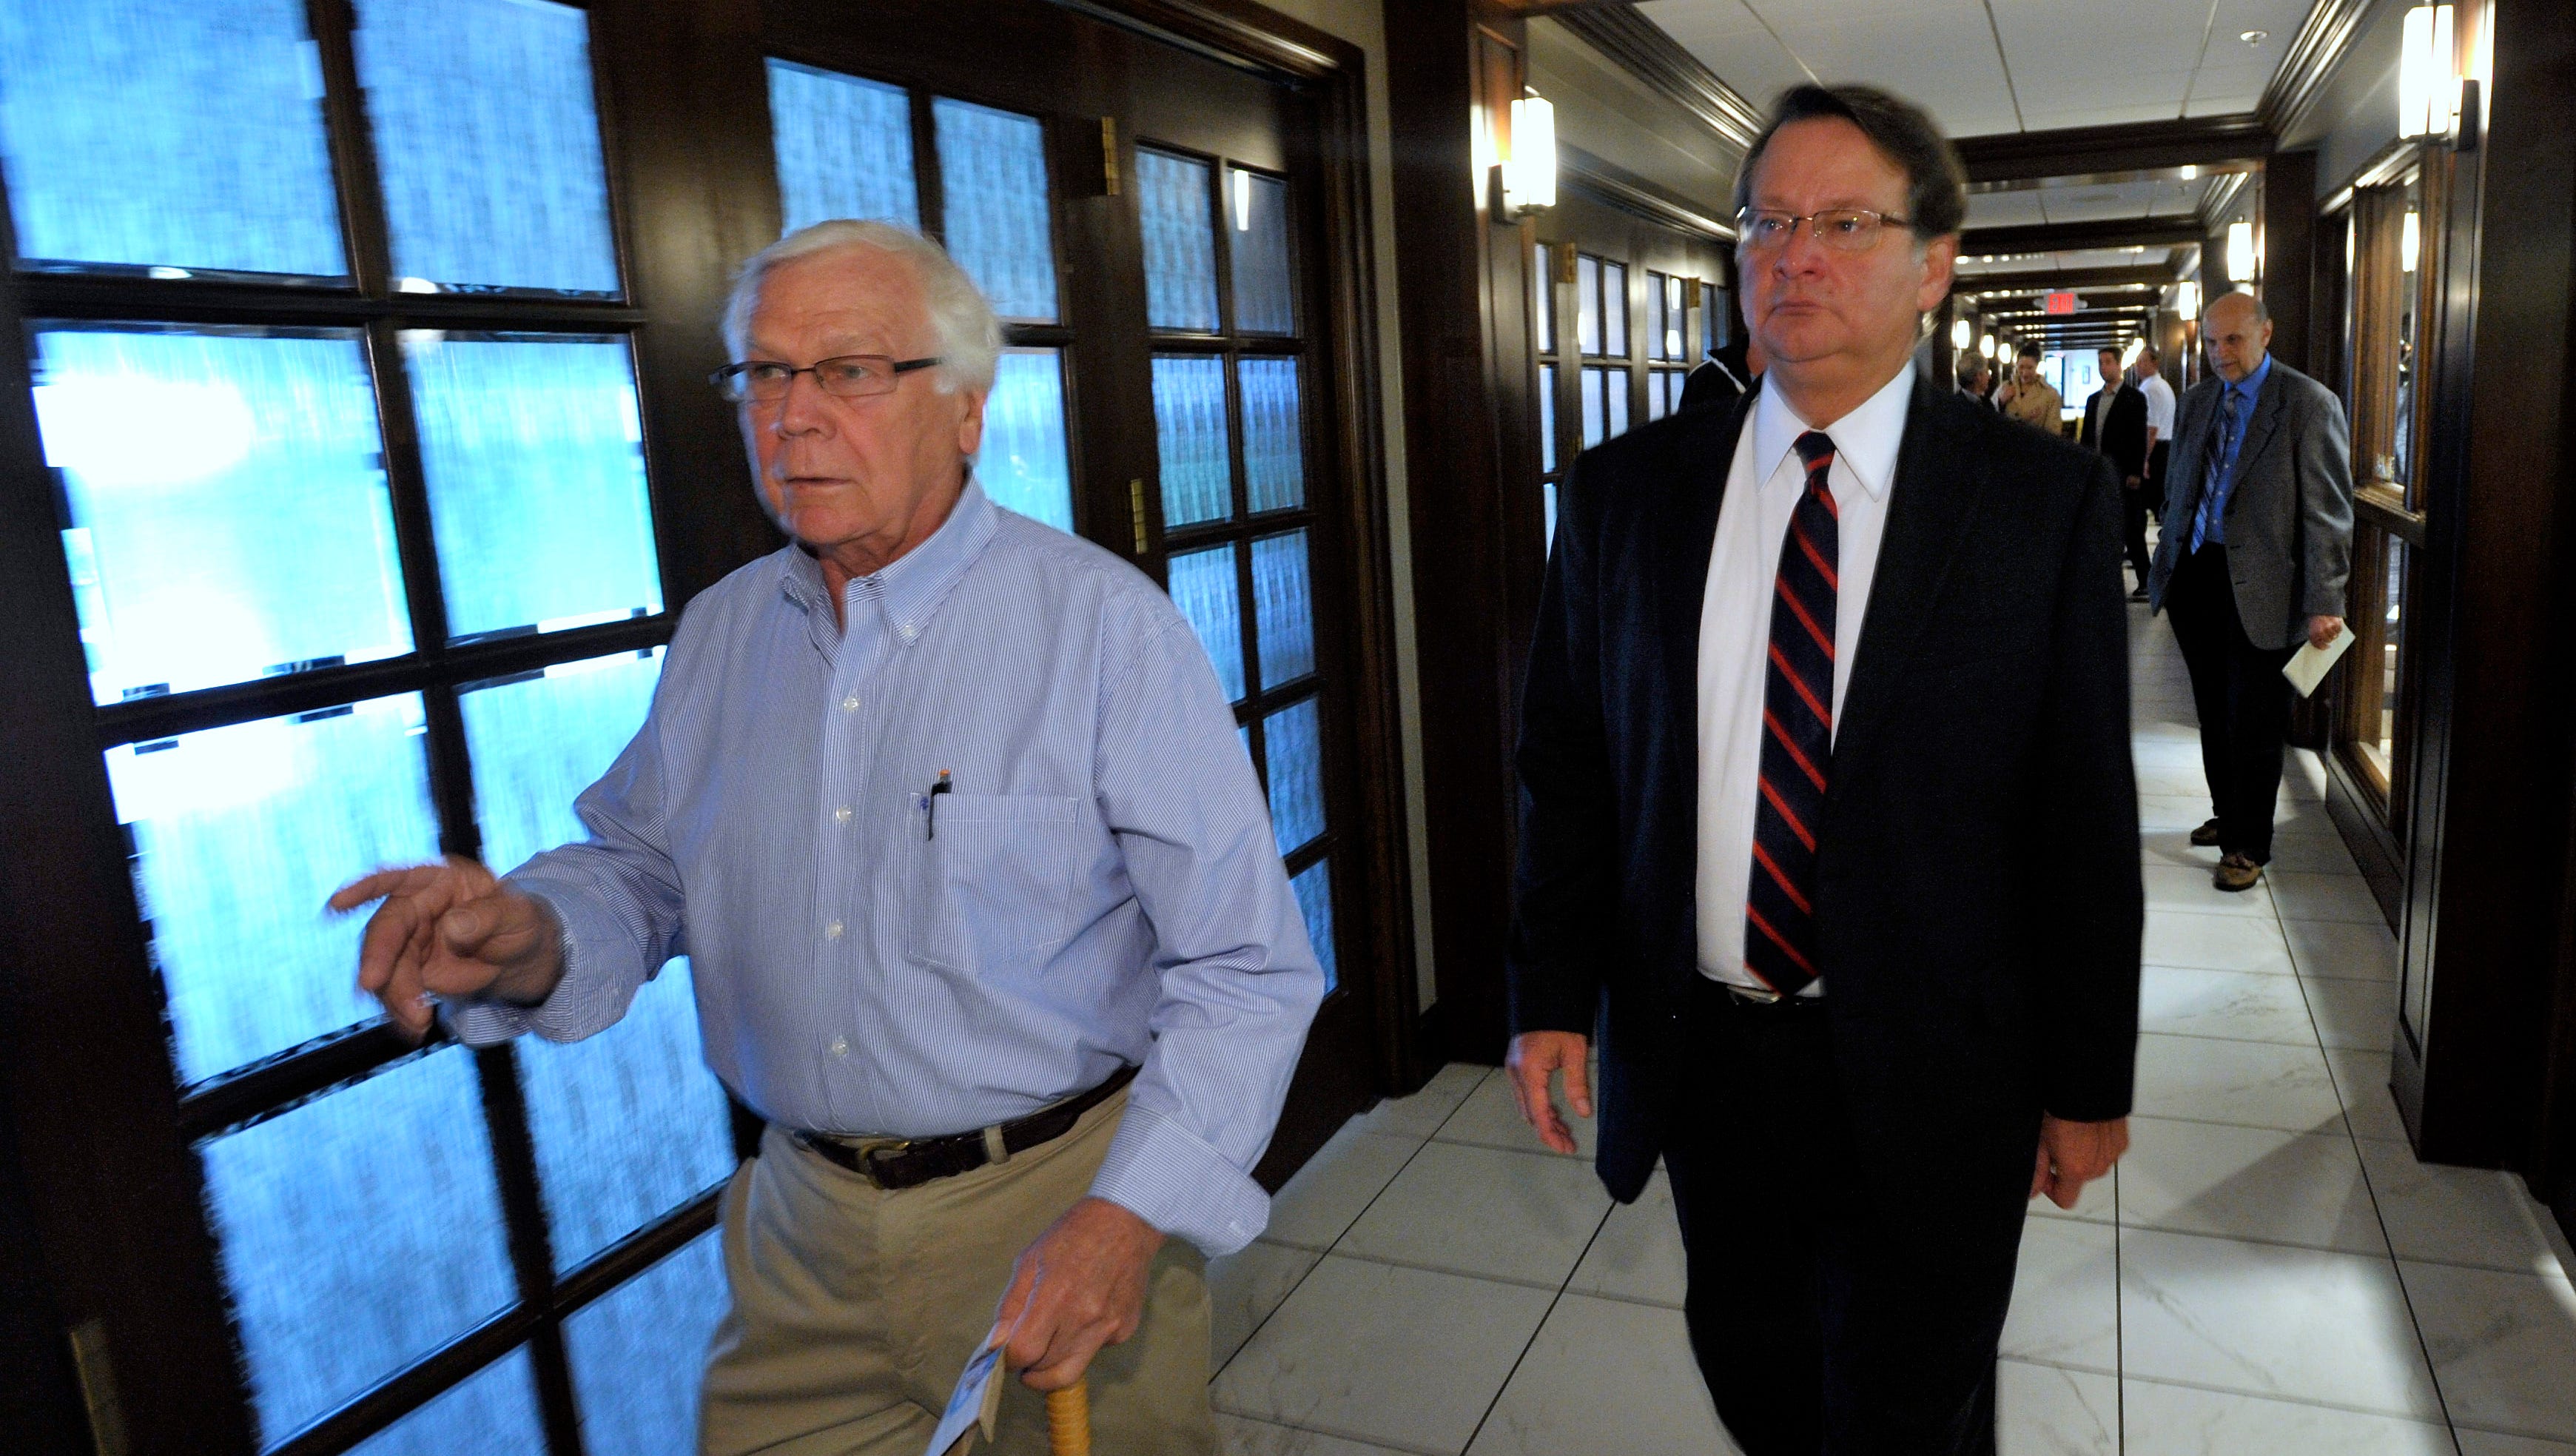 St. Clair County Commissioner Howard Heidemann, left, gives U.S. Congressman Gary Peters a tour of the Hilton Doubletree of Port Huron Hotel and Blue Water Convention Center that is under construction.